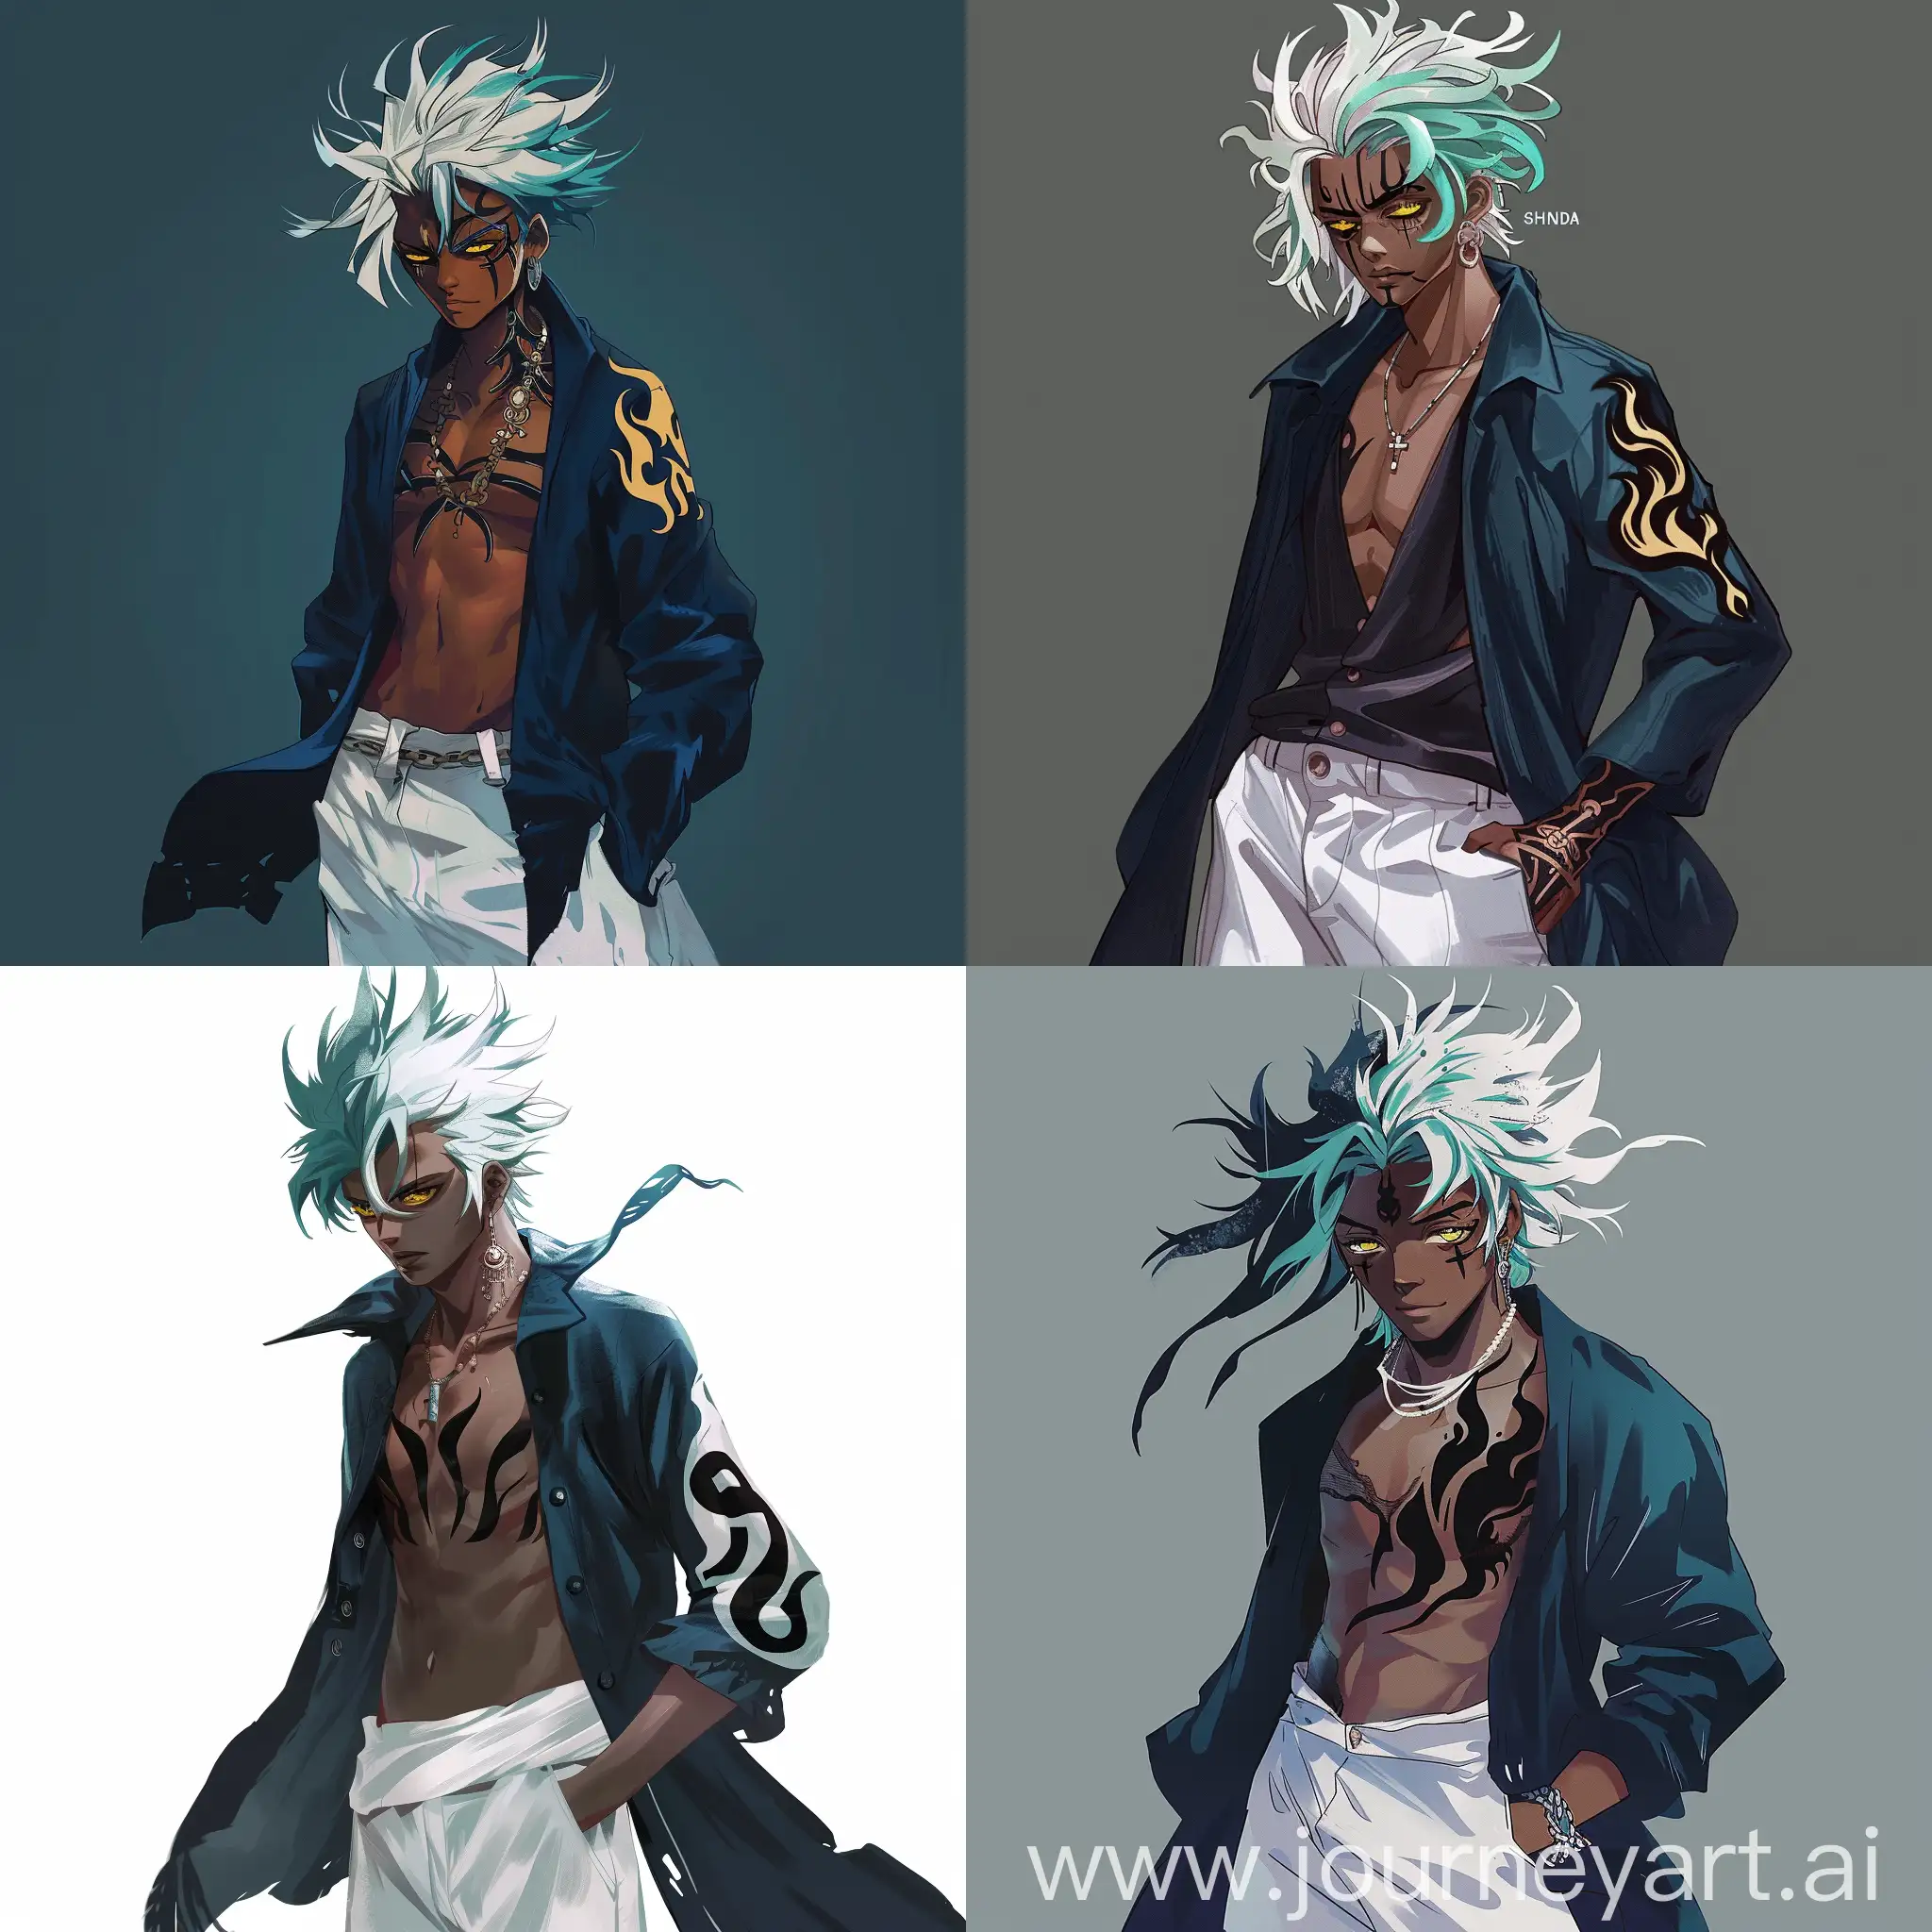 Dynamic-Shandia-Youth-with-Cyan-Hair-Anime-One-Piece-Inspired-Art